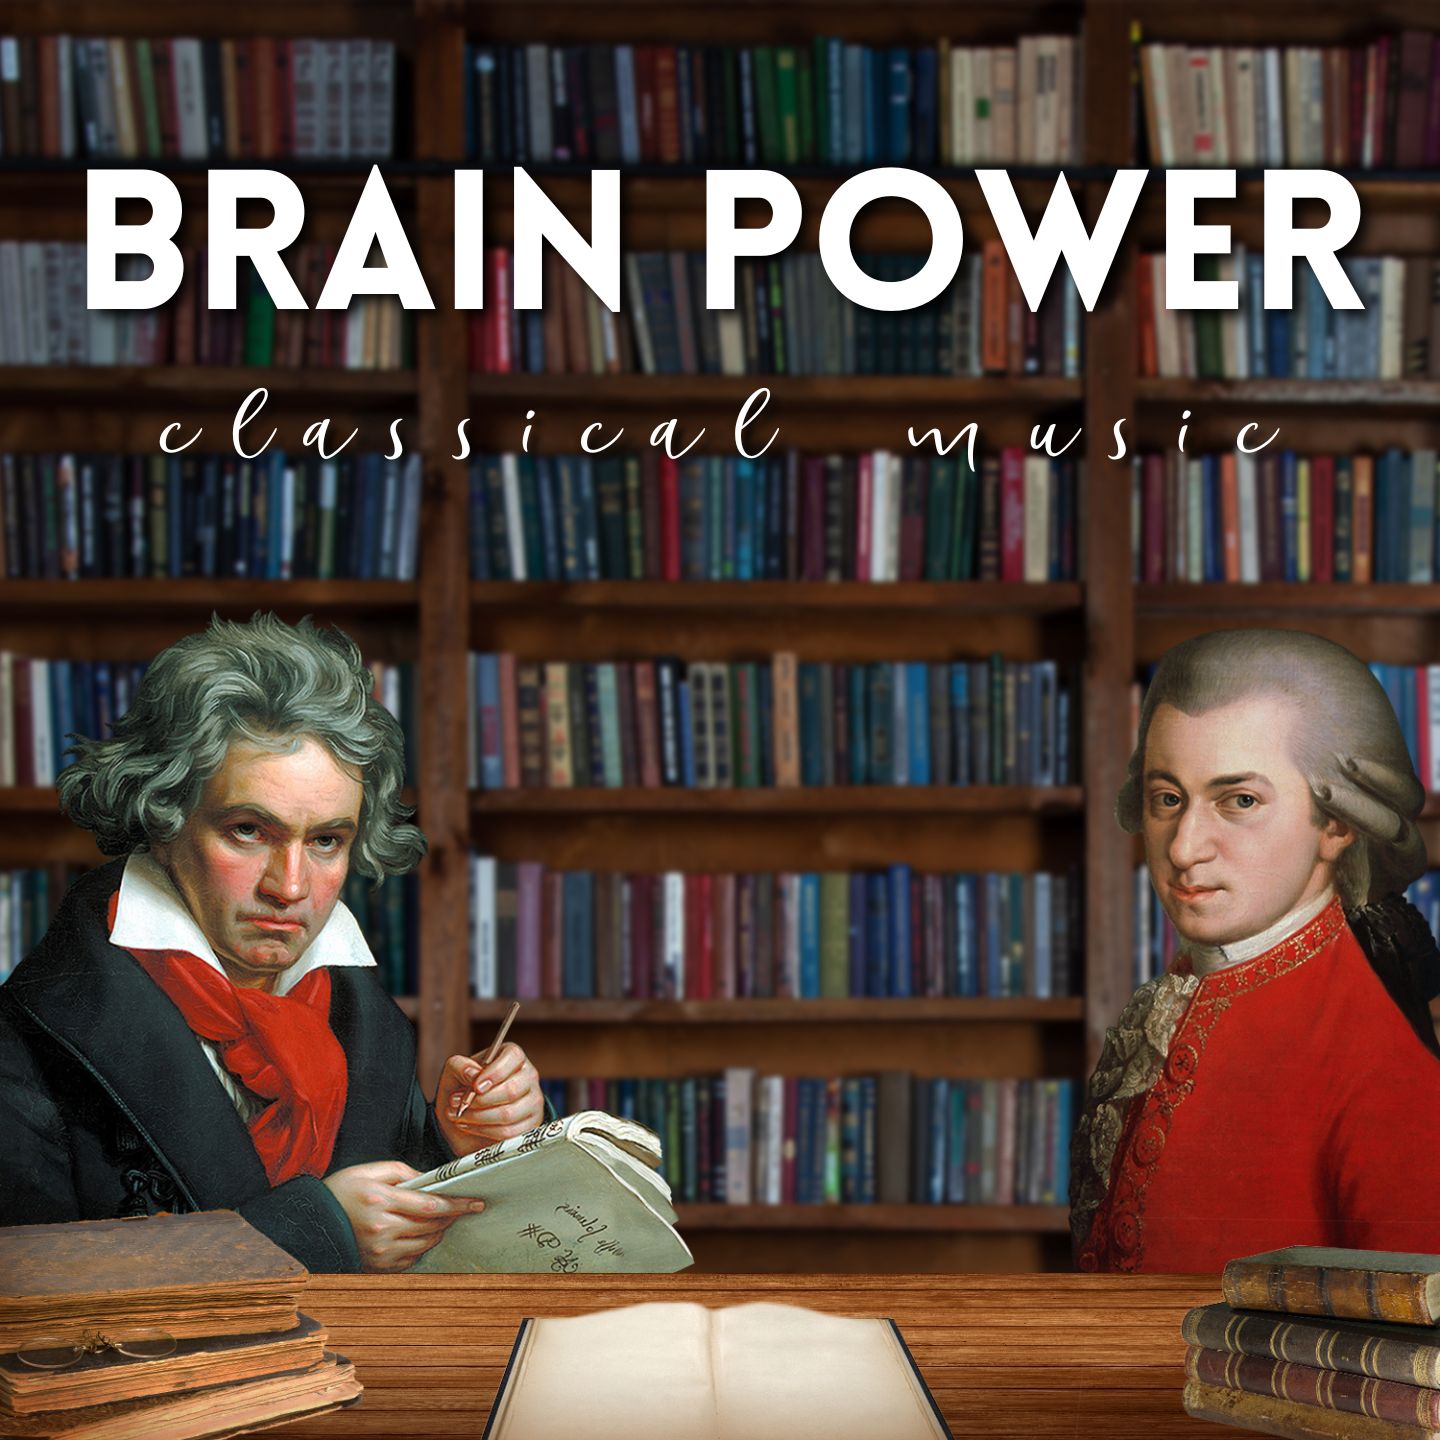 Classical Music for Brain Power